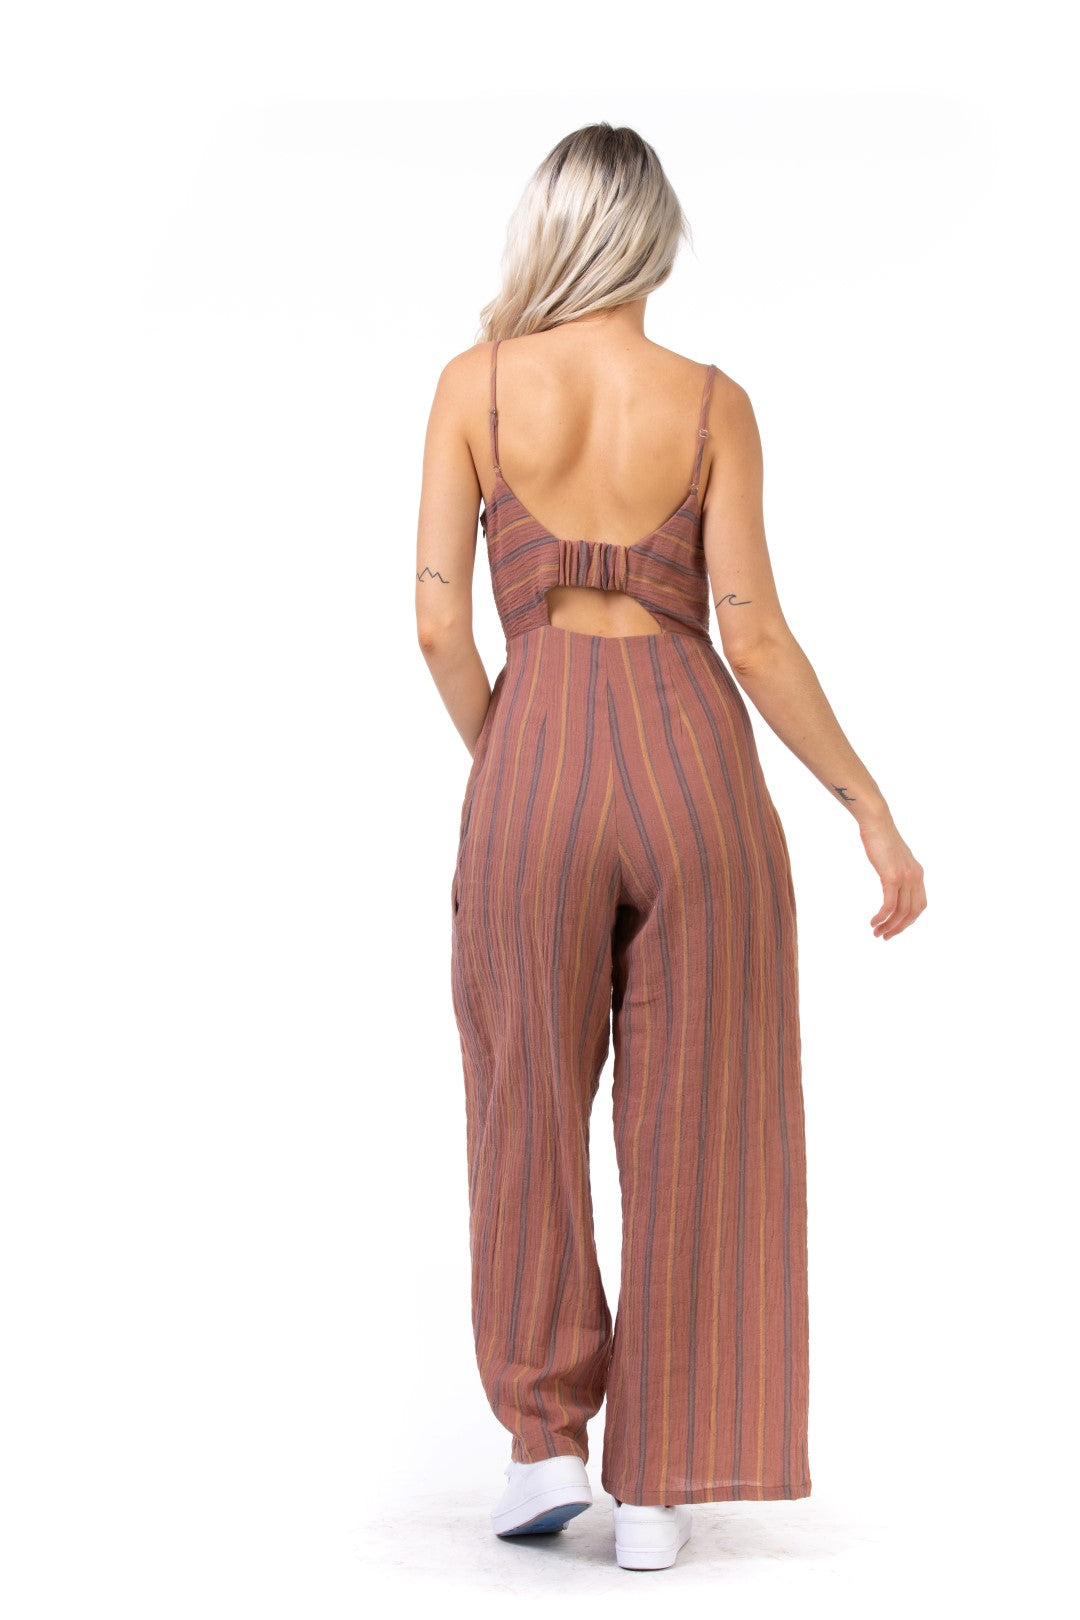 EDGY Land Girl's and Women's Cami High Waist Wrap Over Slit Pocket Pleated Stripe Tank Jumpsuit